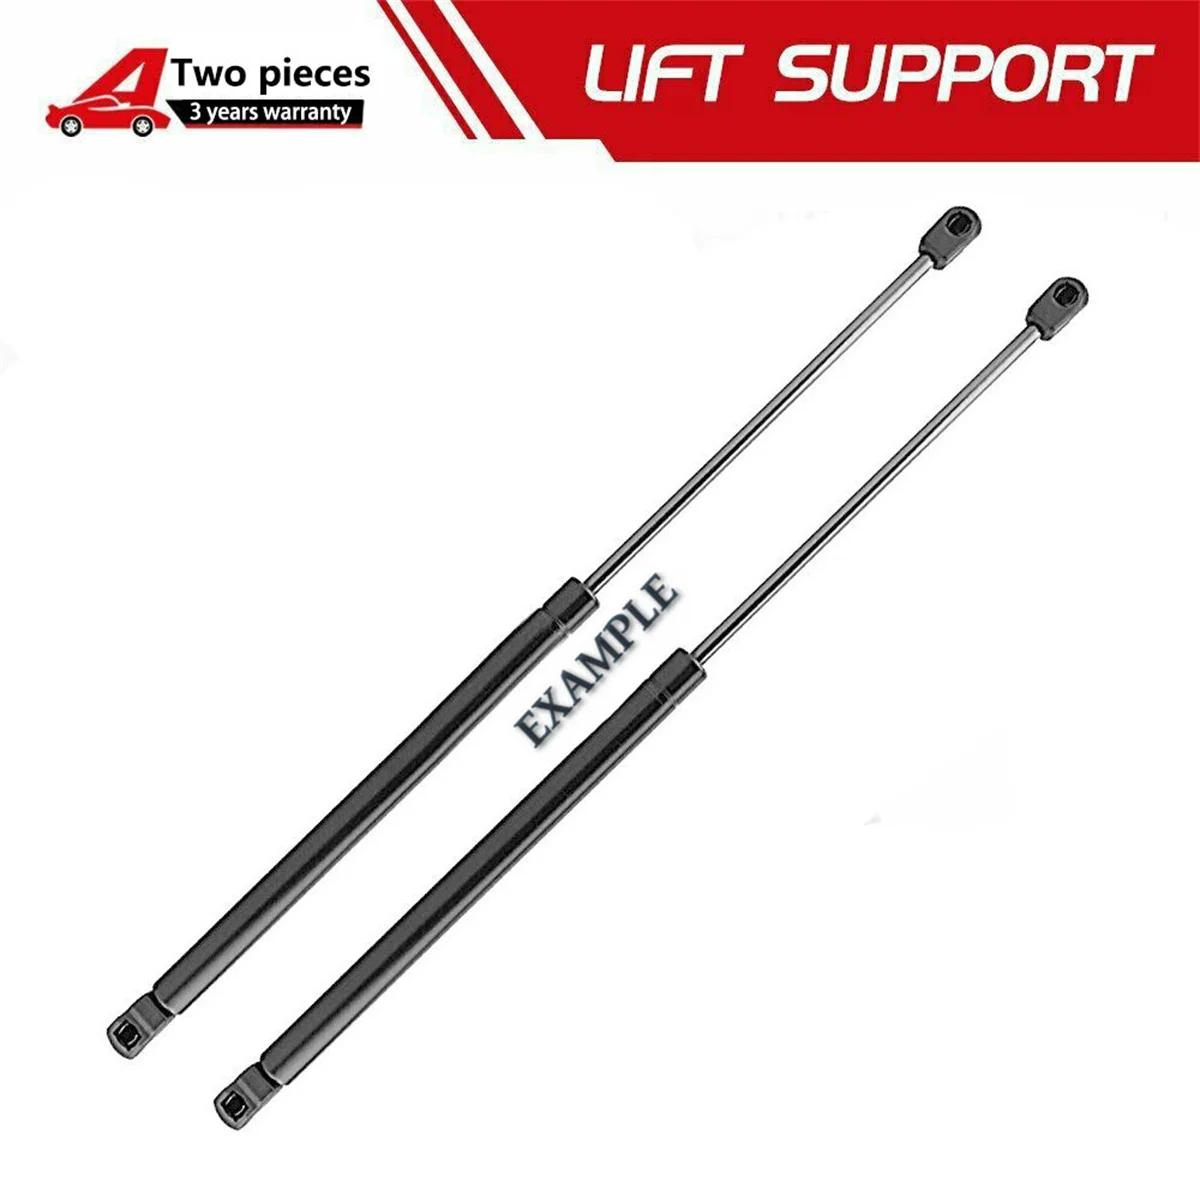 

Qty(2) Front Hood Gas Lift Supports Struts Shocks For Hyundai Sonata 2011 2012 2013 2014 Extended Length:15.13"